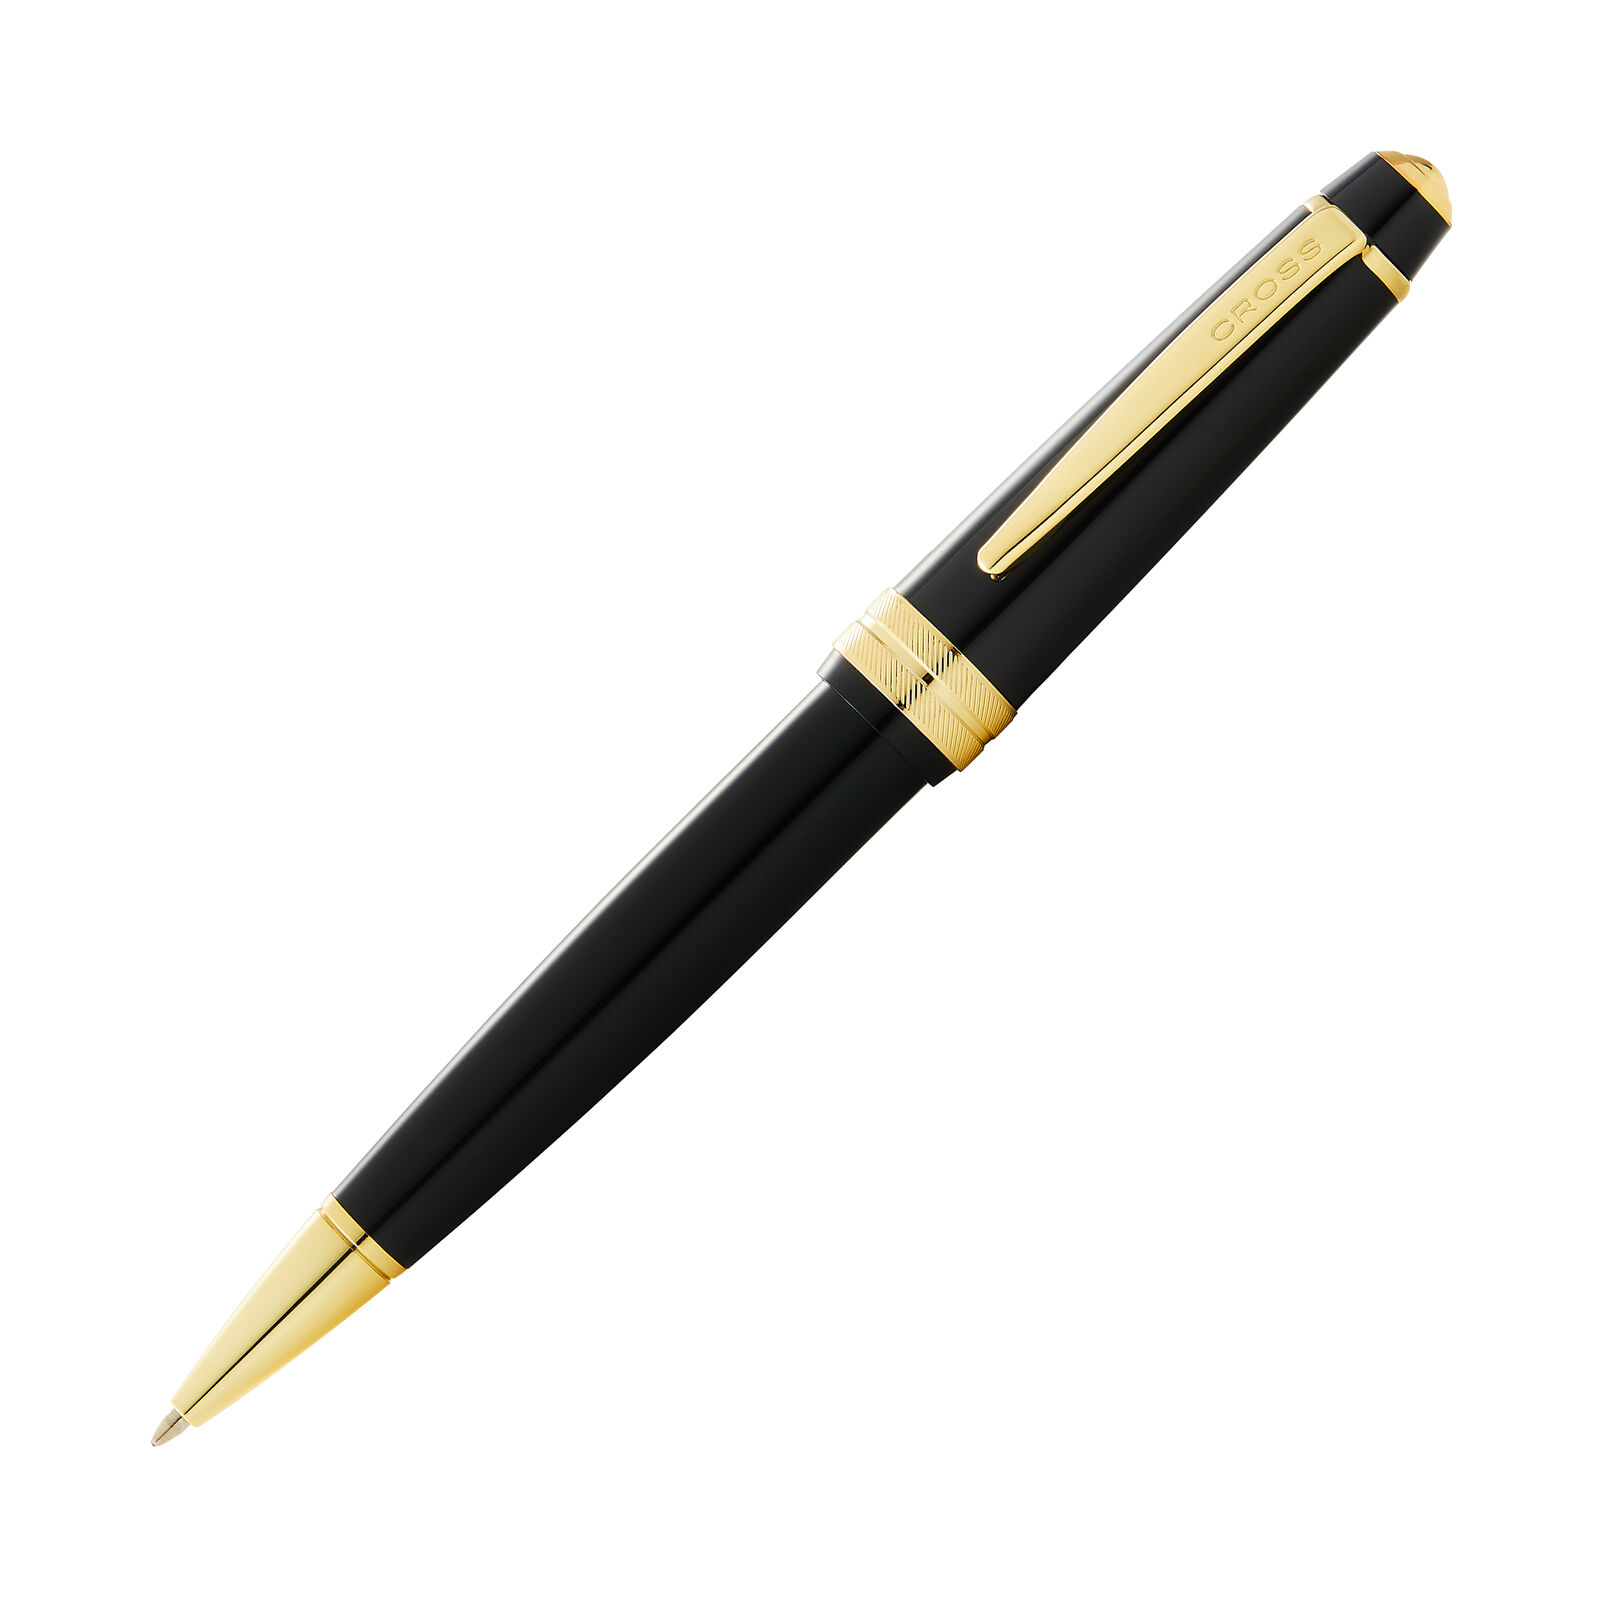 Cross Bailey Light Ballpoint Pen in Glossy Black Resin with Gold Trim - NEW